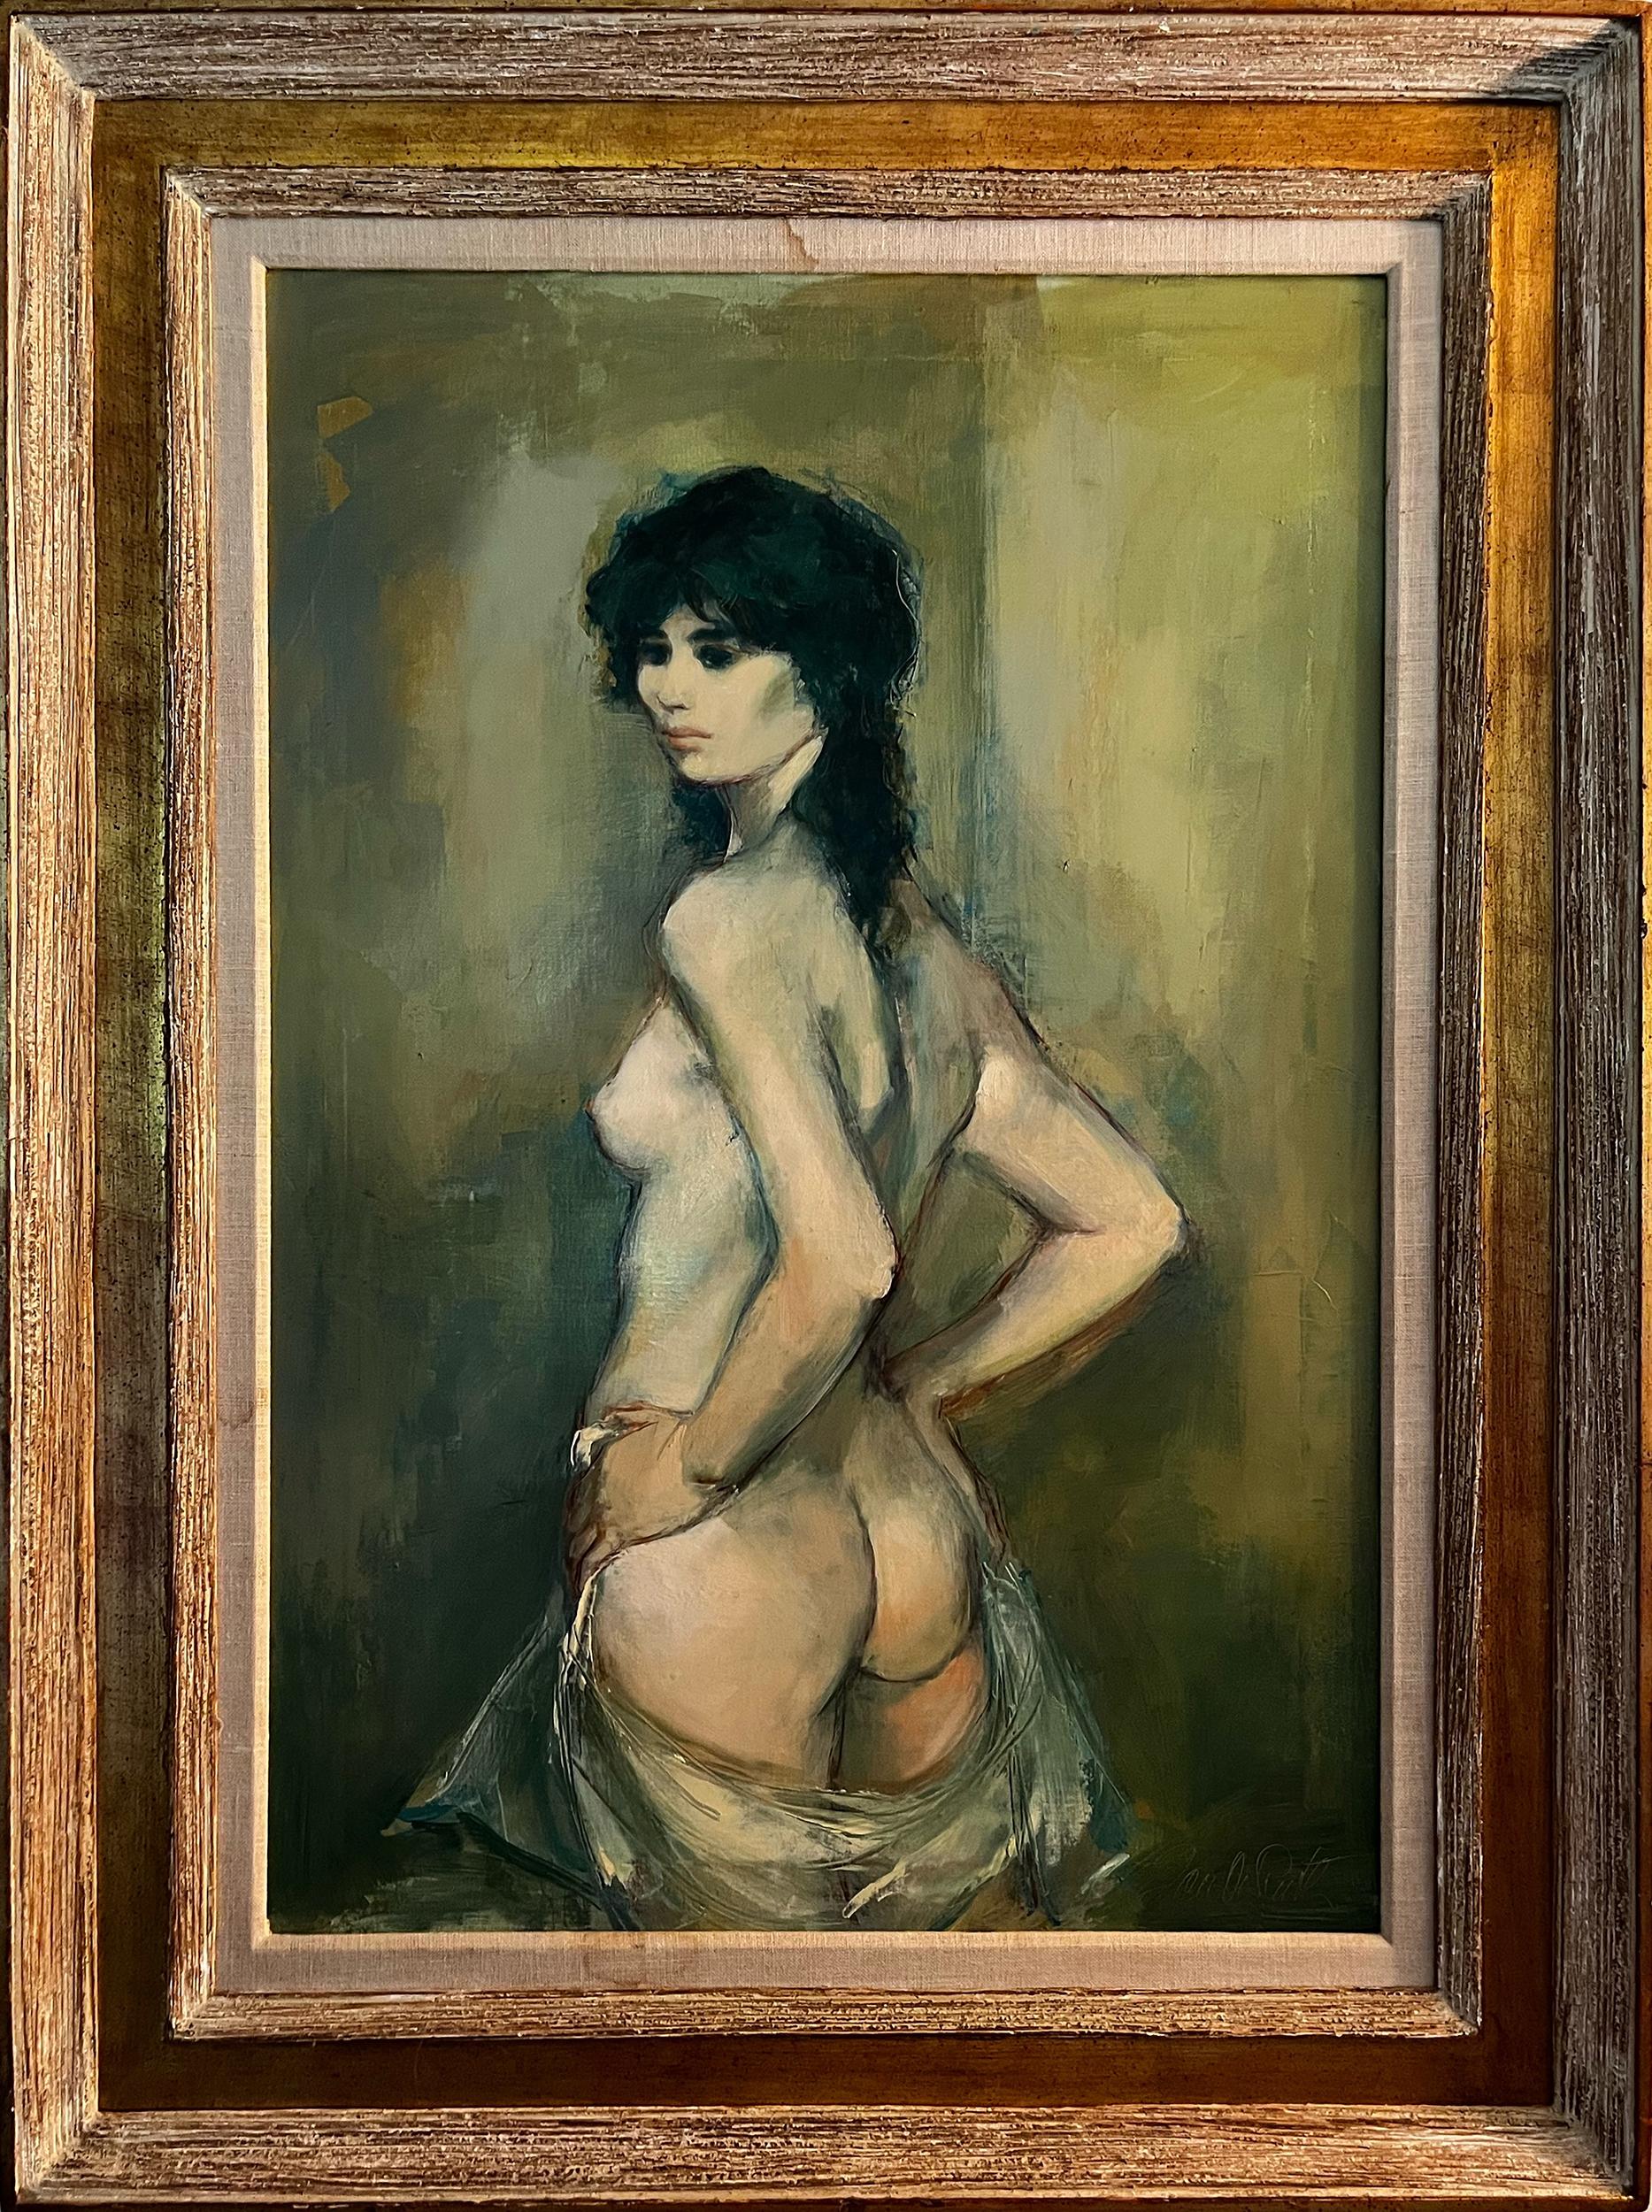 Ivory White, Nude Oil Painting by Jan De Ruth